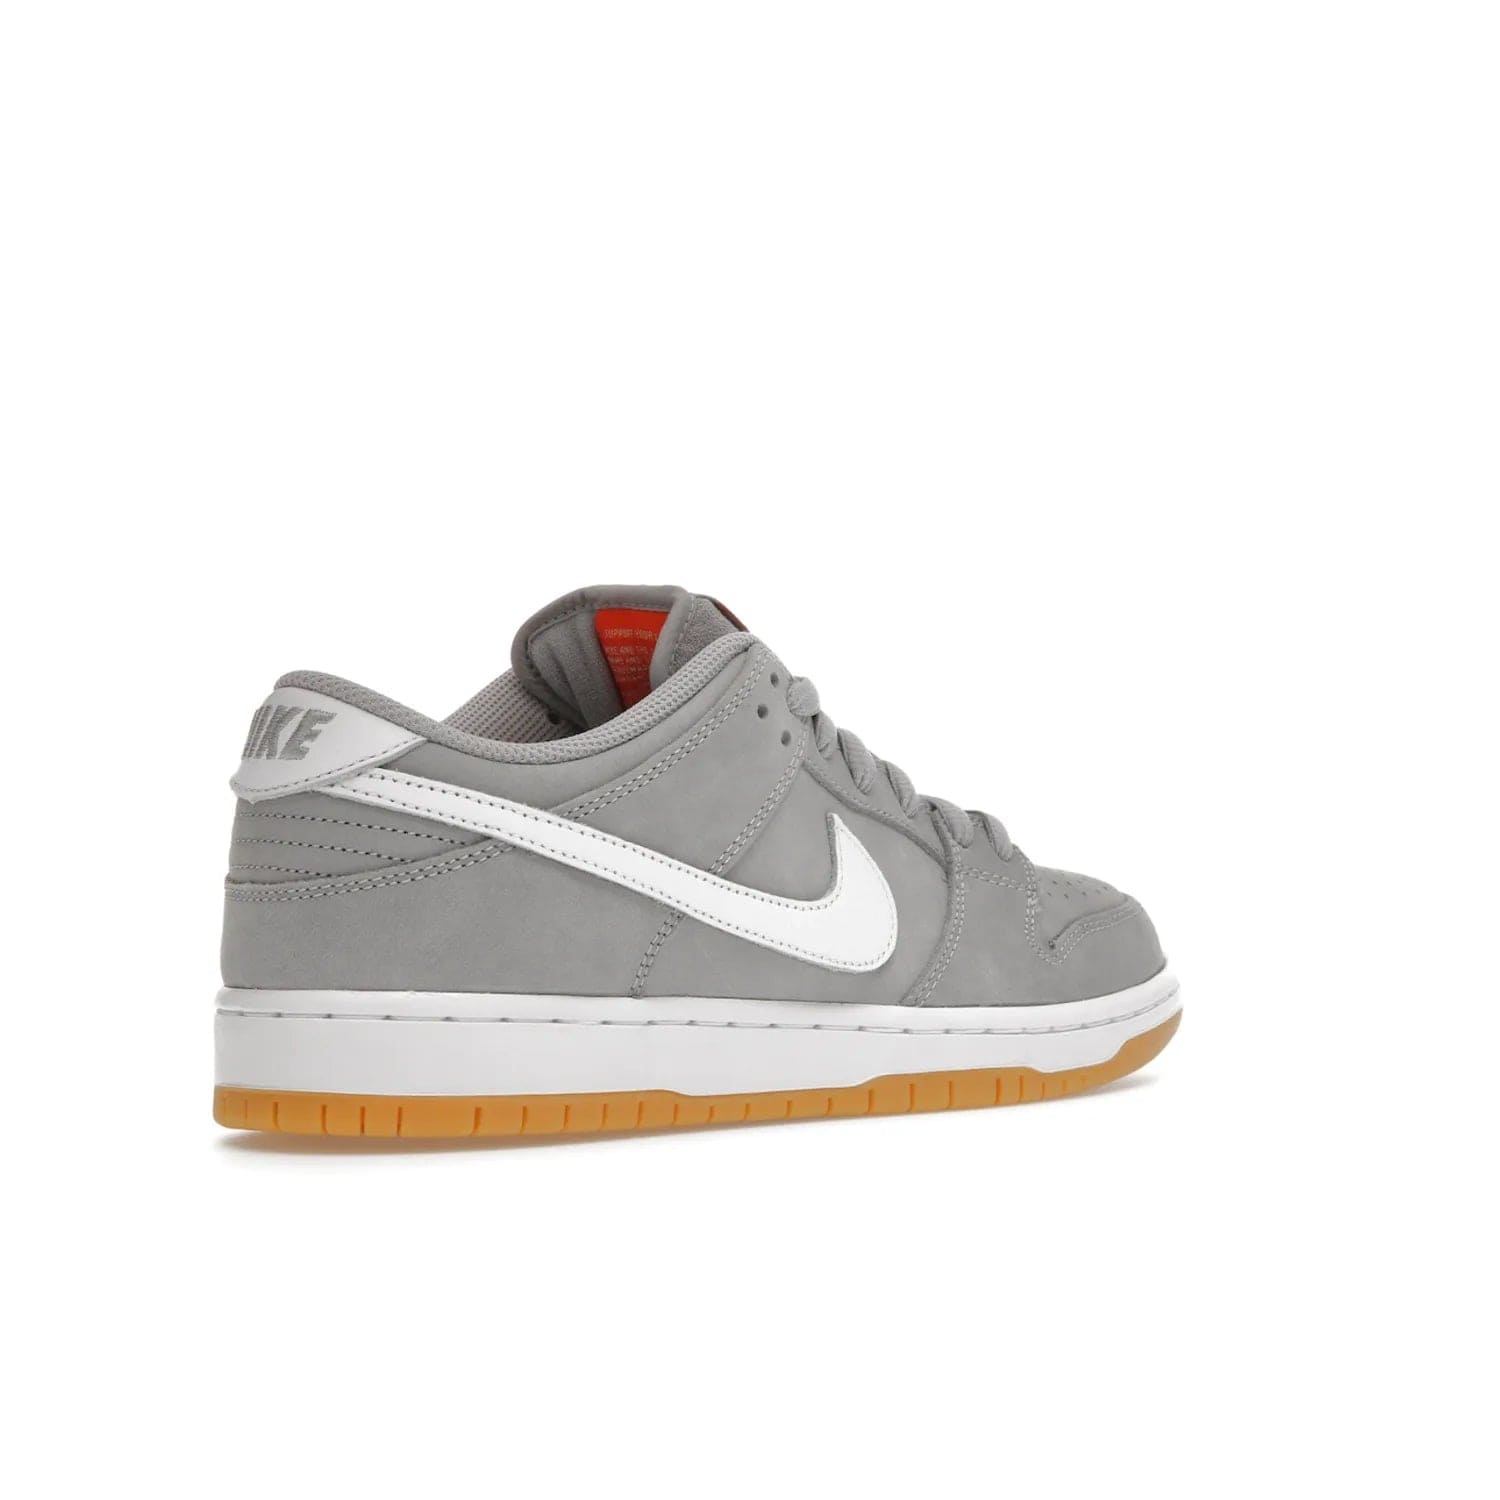 Nike SB Dunk Low Pro ISO Orange Label Wolf Grey Gum - Image 33 - Only at www.BallersClubKickz.com - Introducing Nike's SB Dunk Low Pro ISO Orange Label Wolf Grey Gum - a stylish shoe with a premium Wolf Grey upper, white leather Nike Swoosh, and an eye-catching gum outsole. With special Nike branding and packaging, this shoe adds a unique fashion statement. Out Feb. 24, 2023.